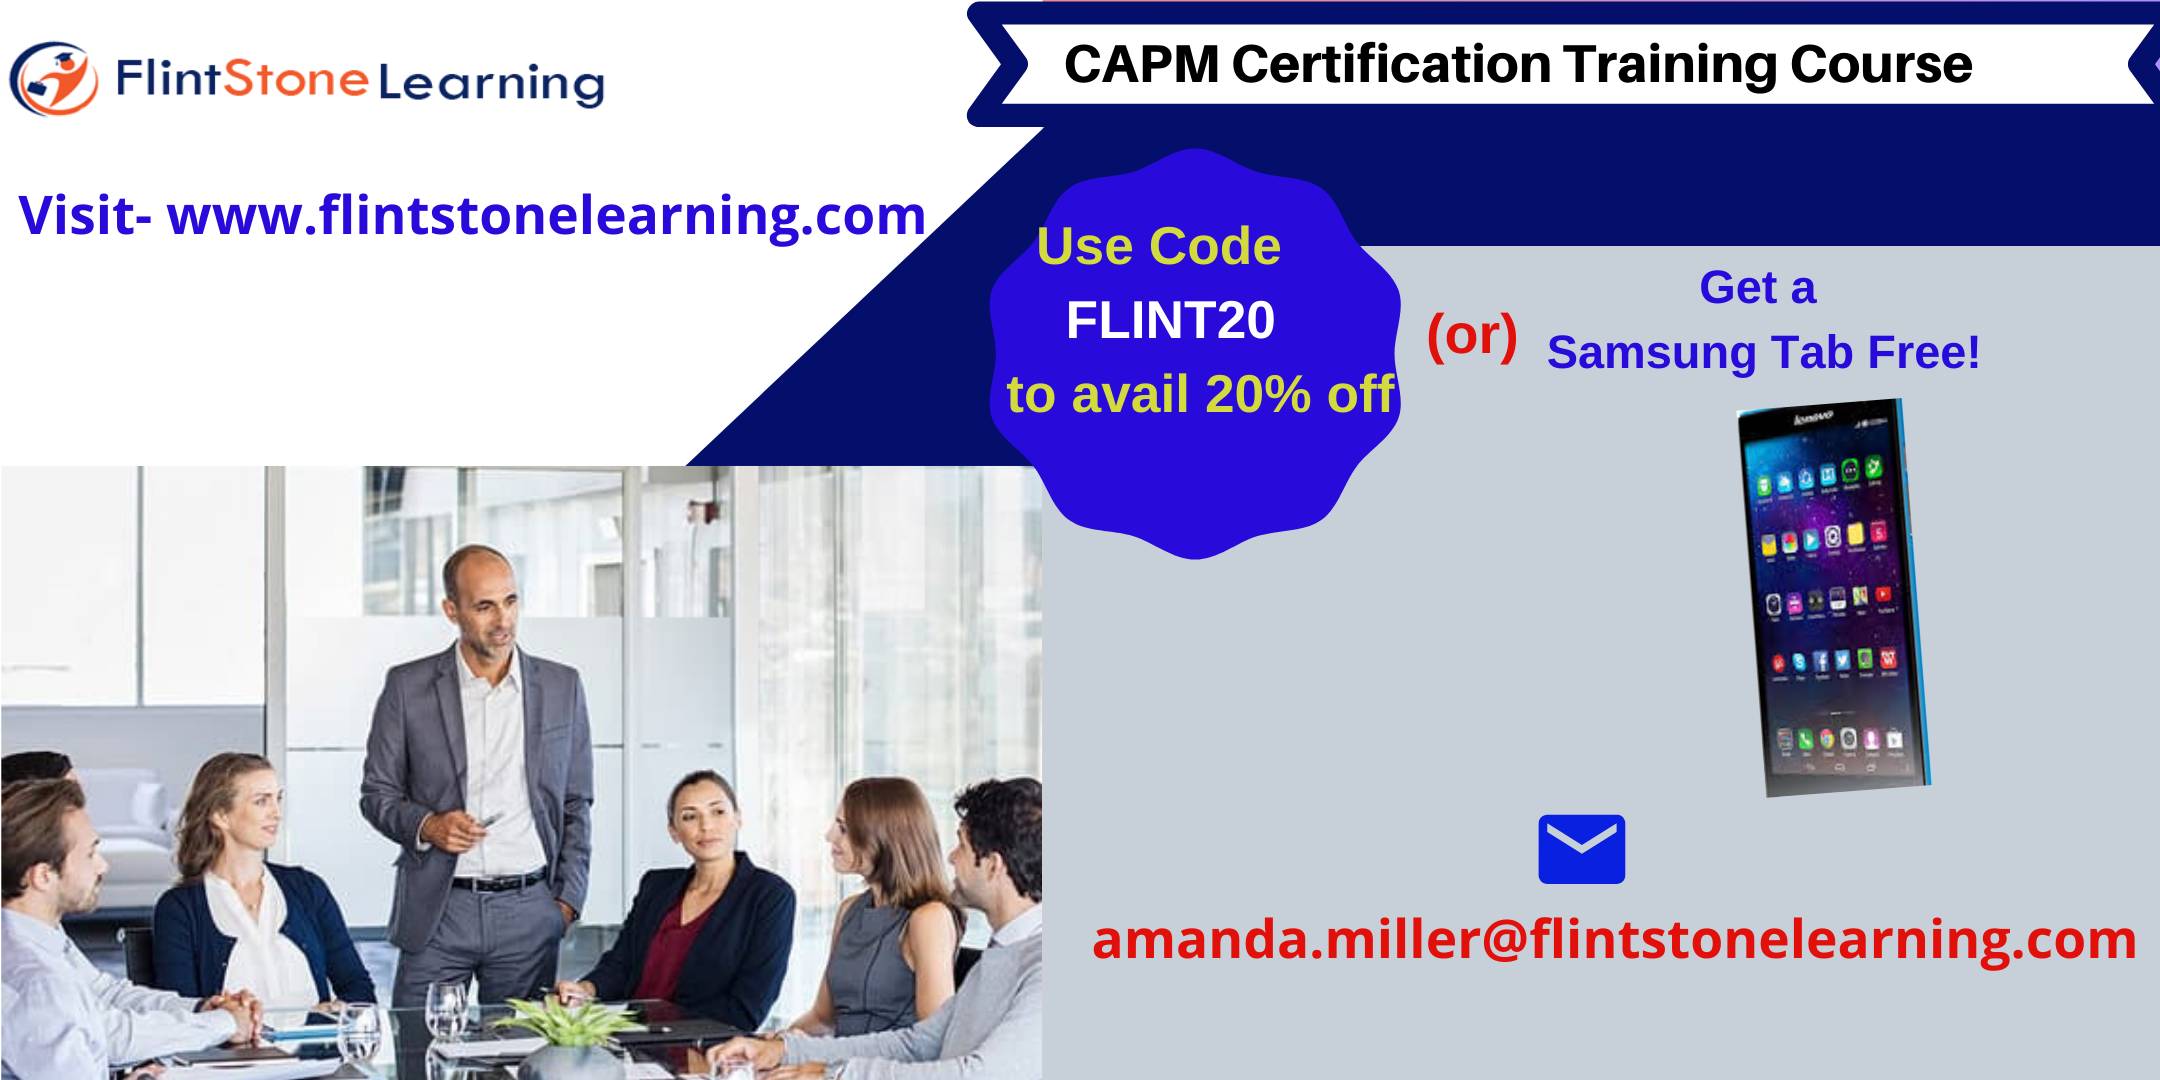 CAPM Certification Training Course in The Woodlands, TX